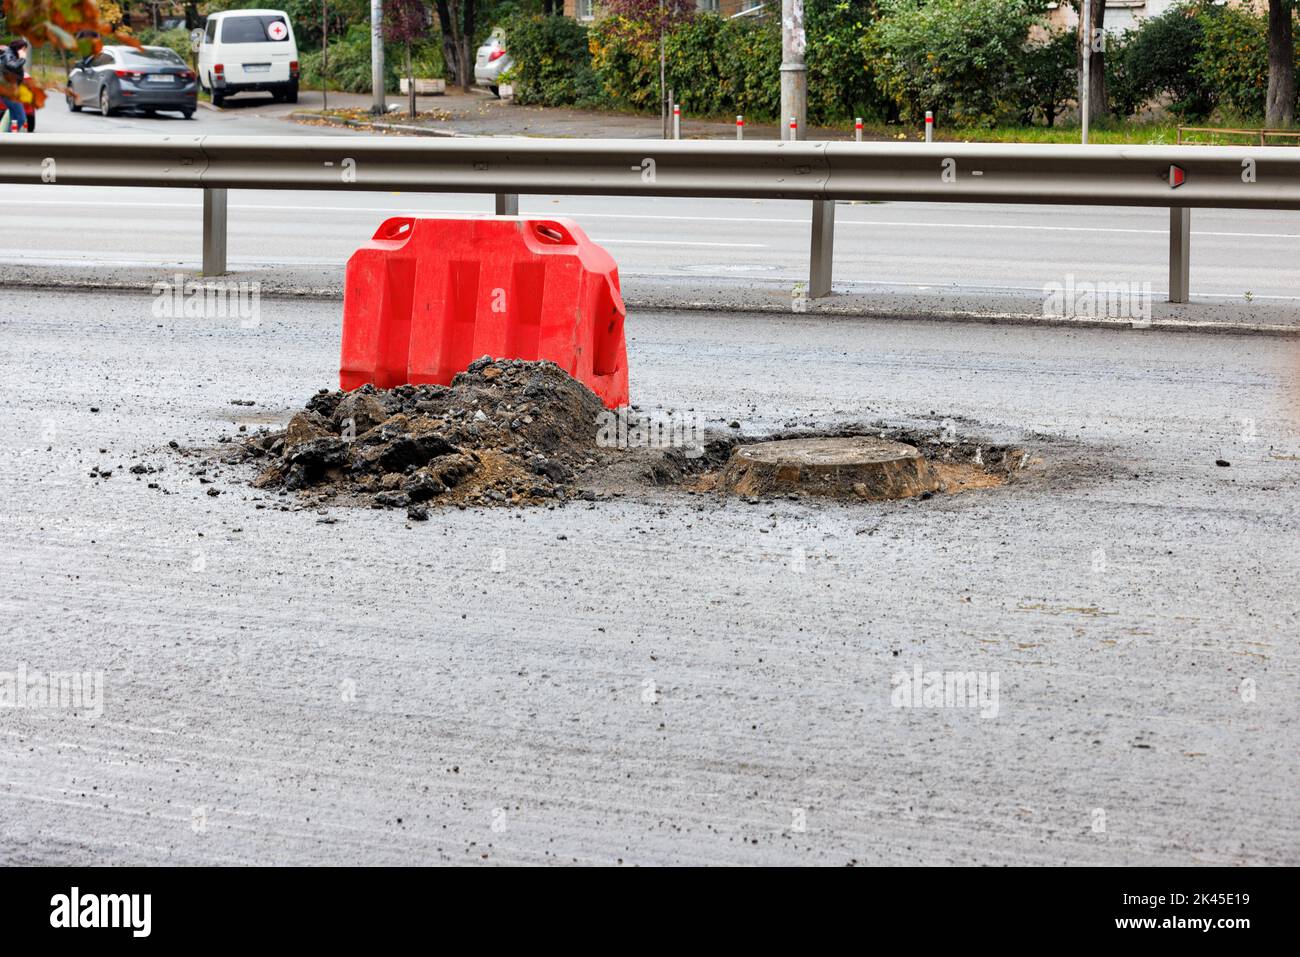 A red road barrier warns drivers of road hazards and blocks a manhole being repaired. Copy space. Stock Photo